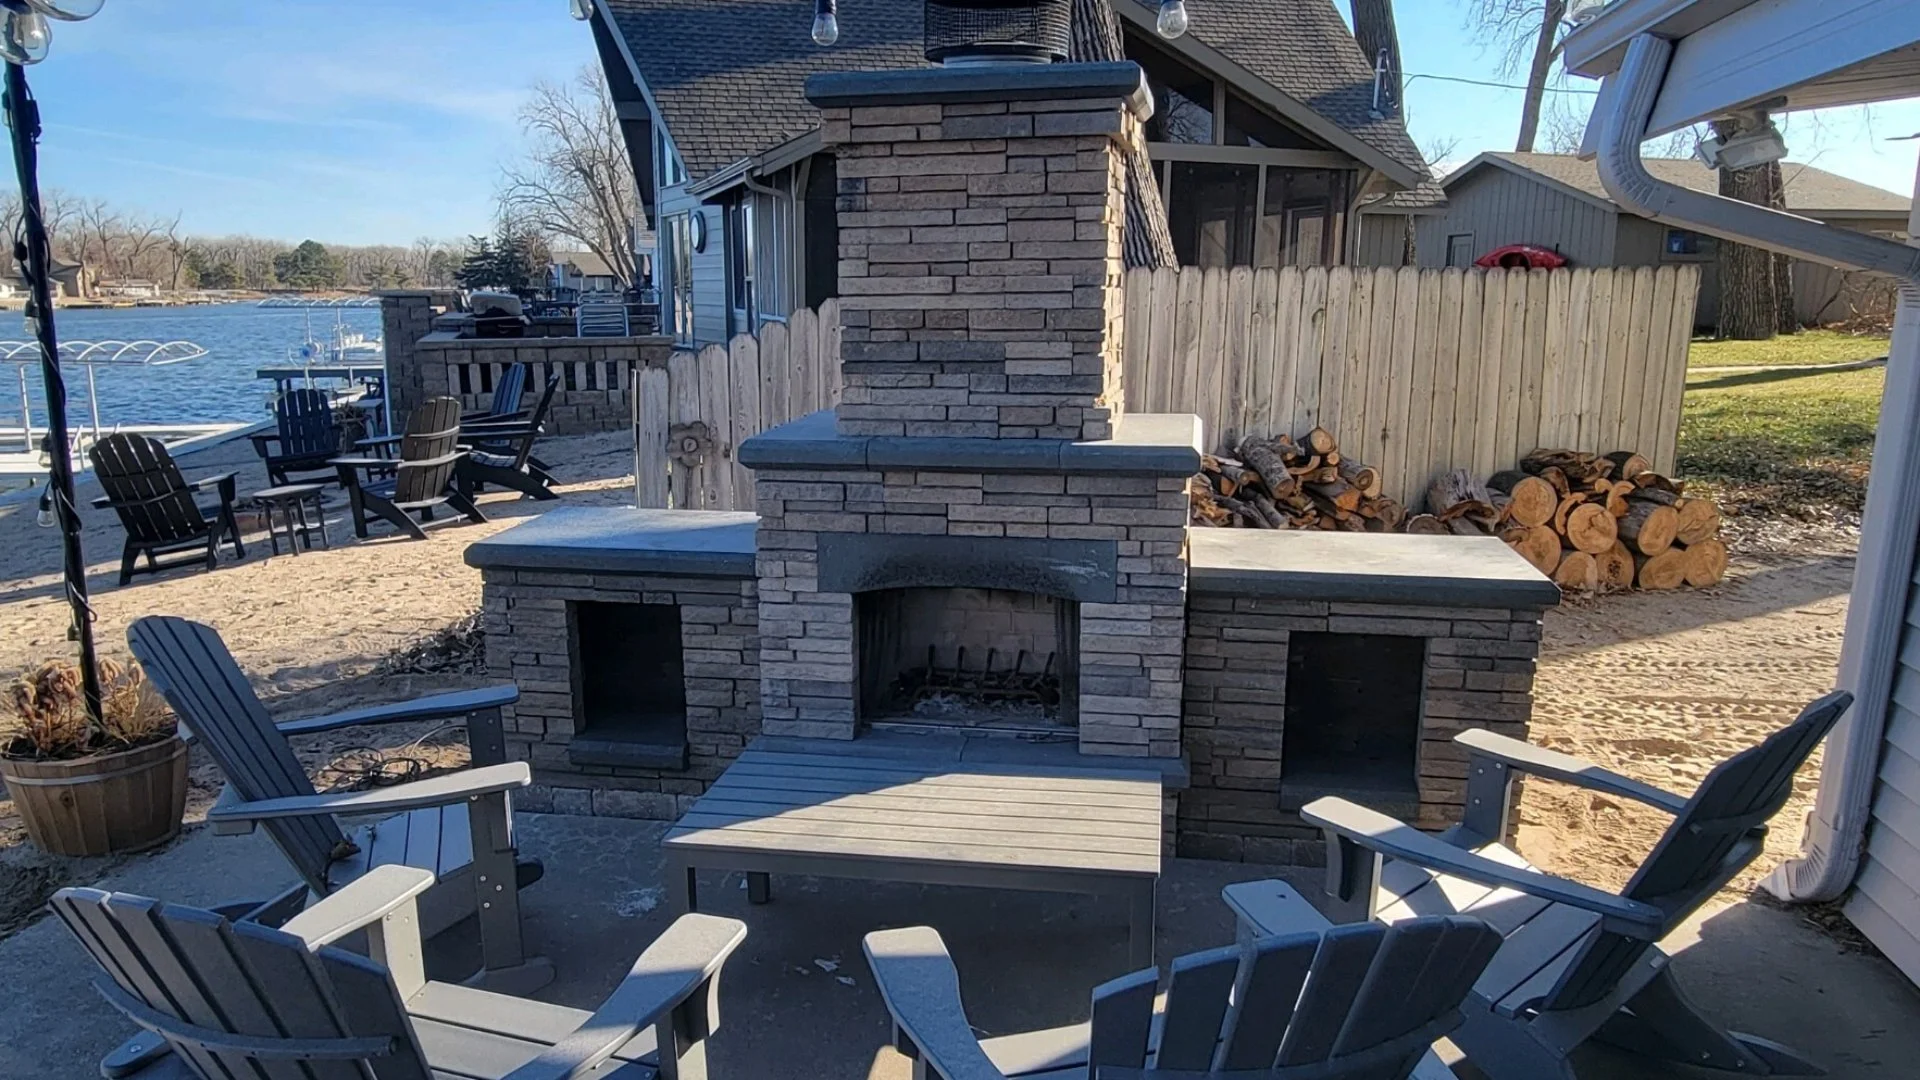 Fire Pits vs Outdoor Fireplaces - 3 Things to Consider to Help You Choose